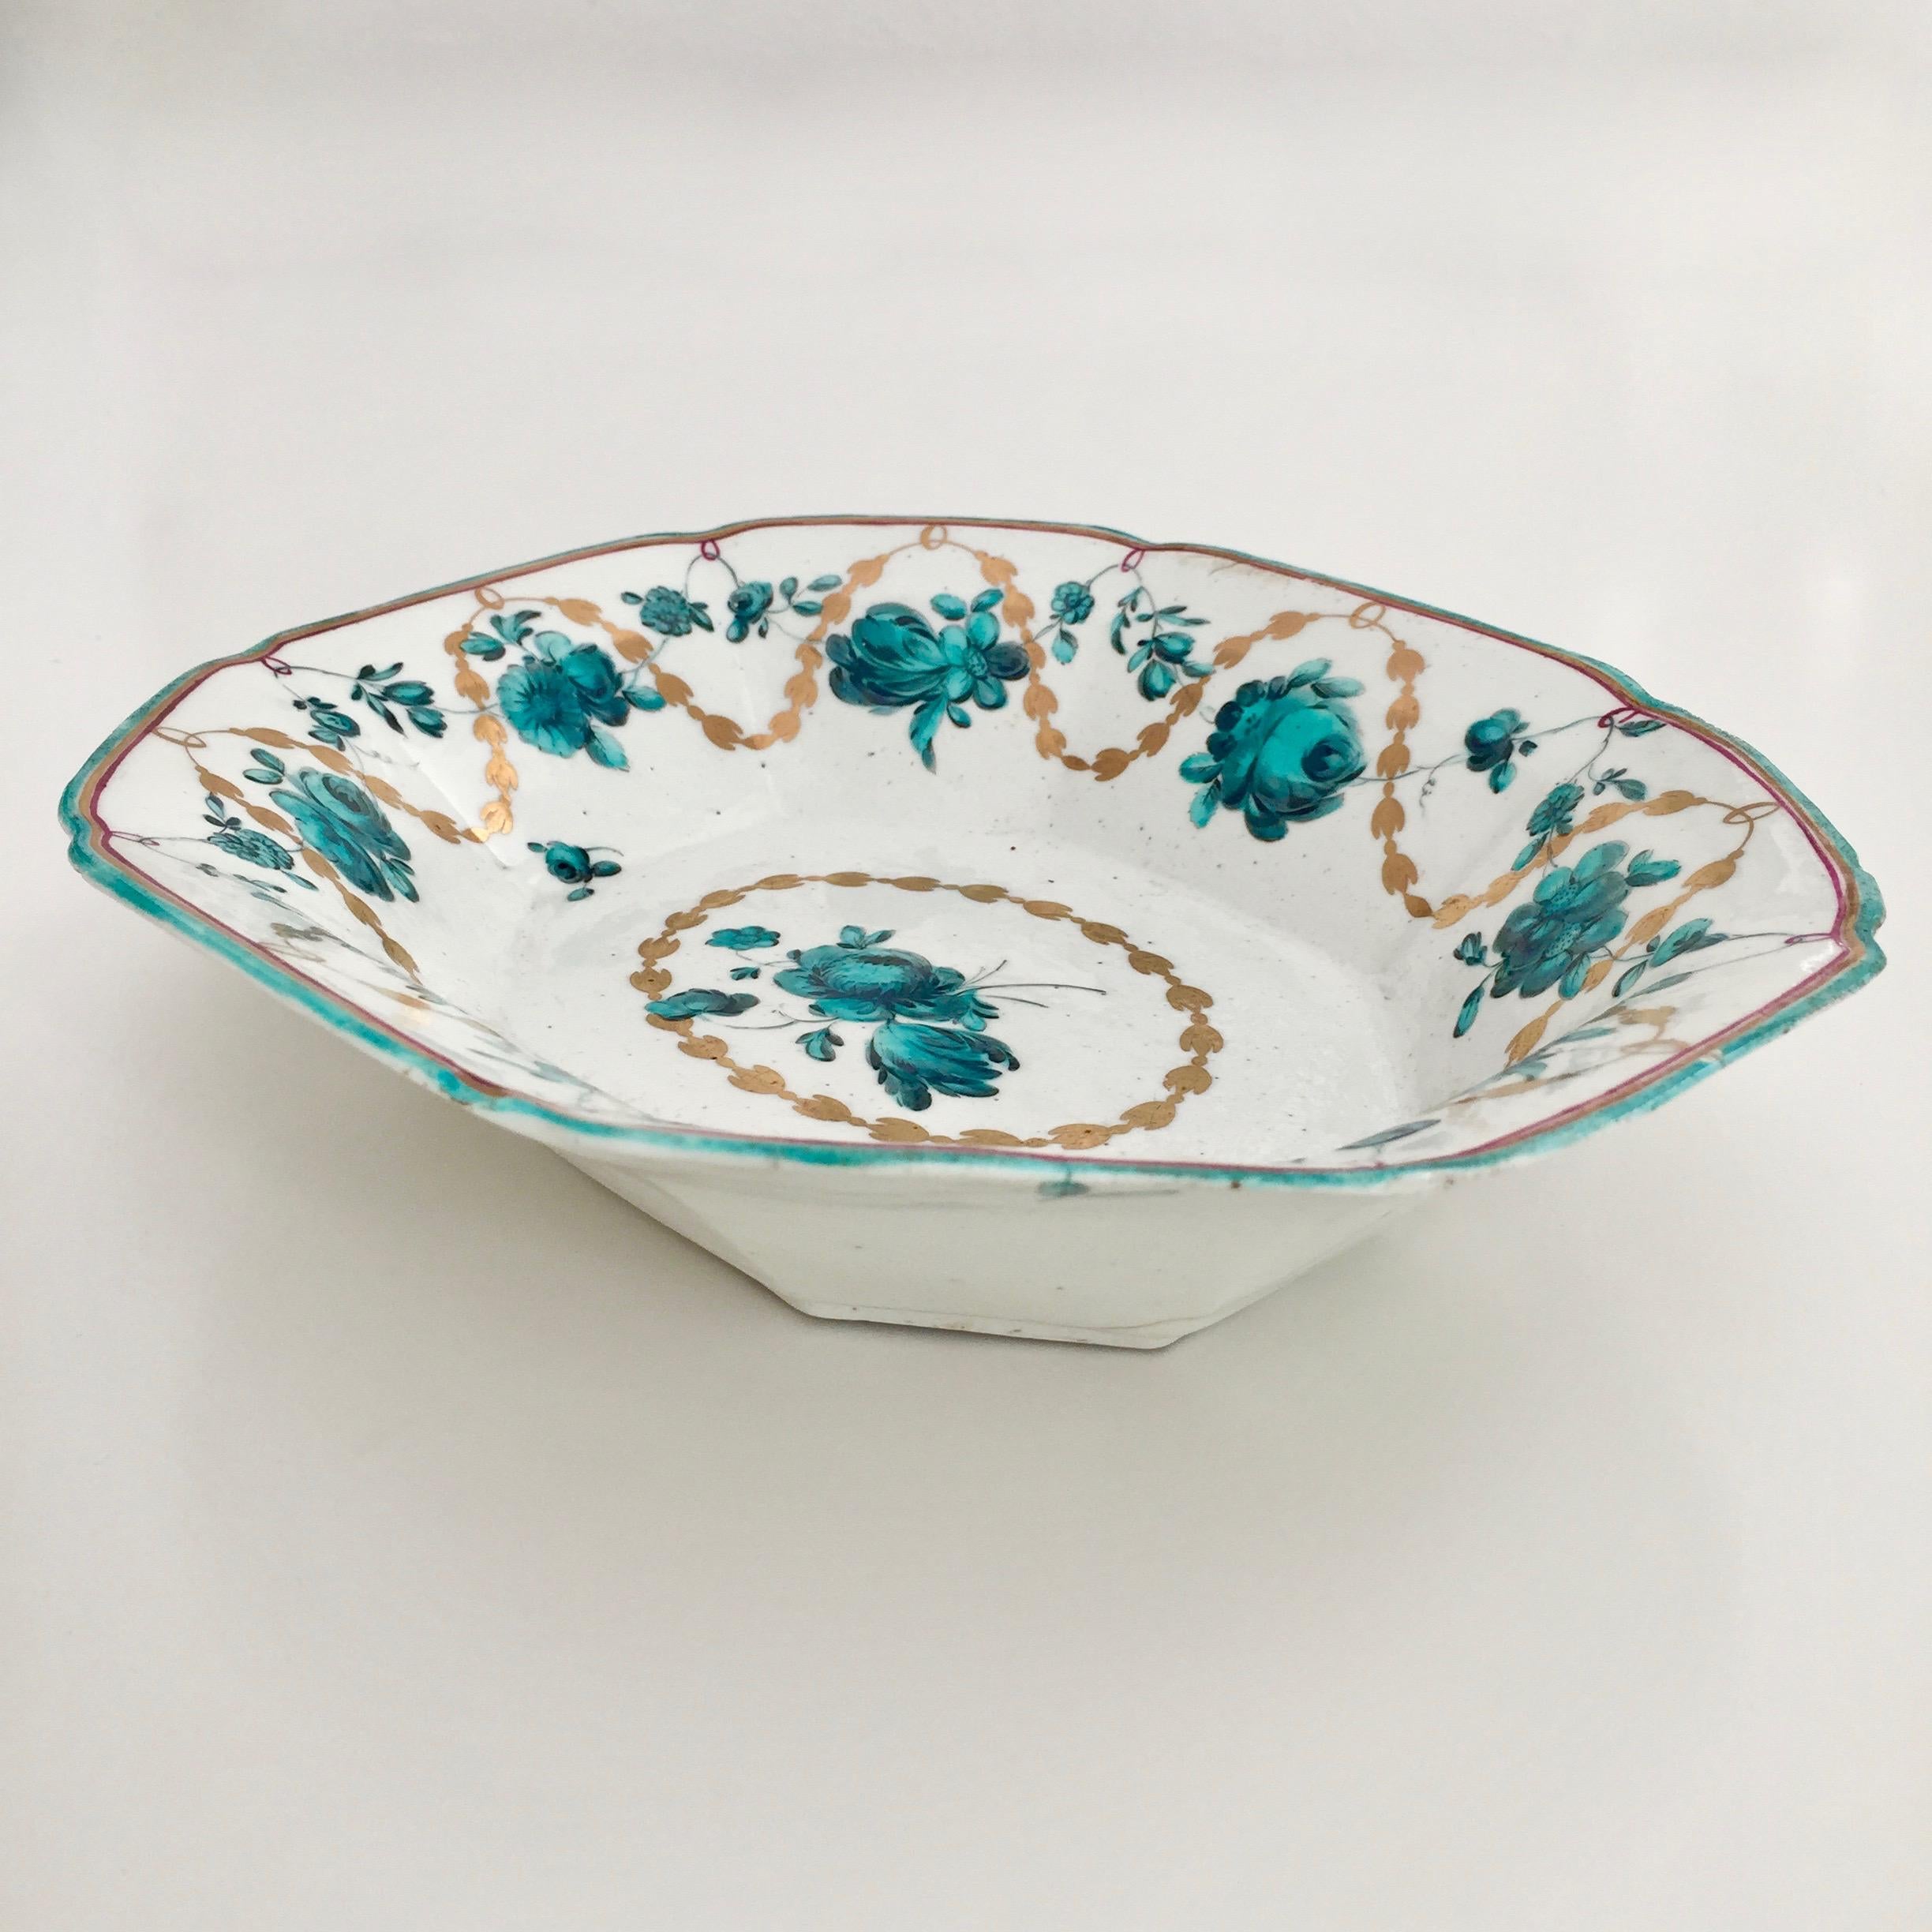 George II Chelsea Porcelain Octagonal Dish, Teal Flowers J Giles, Puce Anchor, 1753-1758